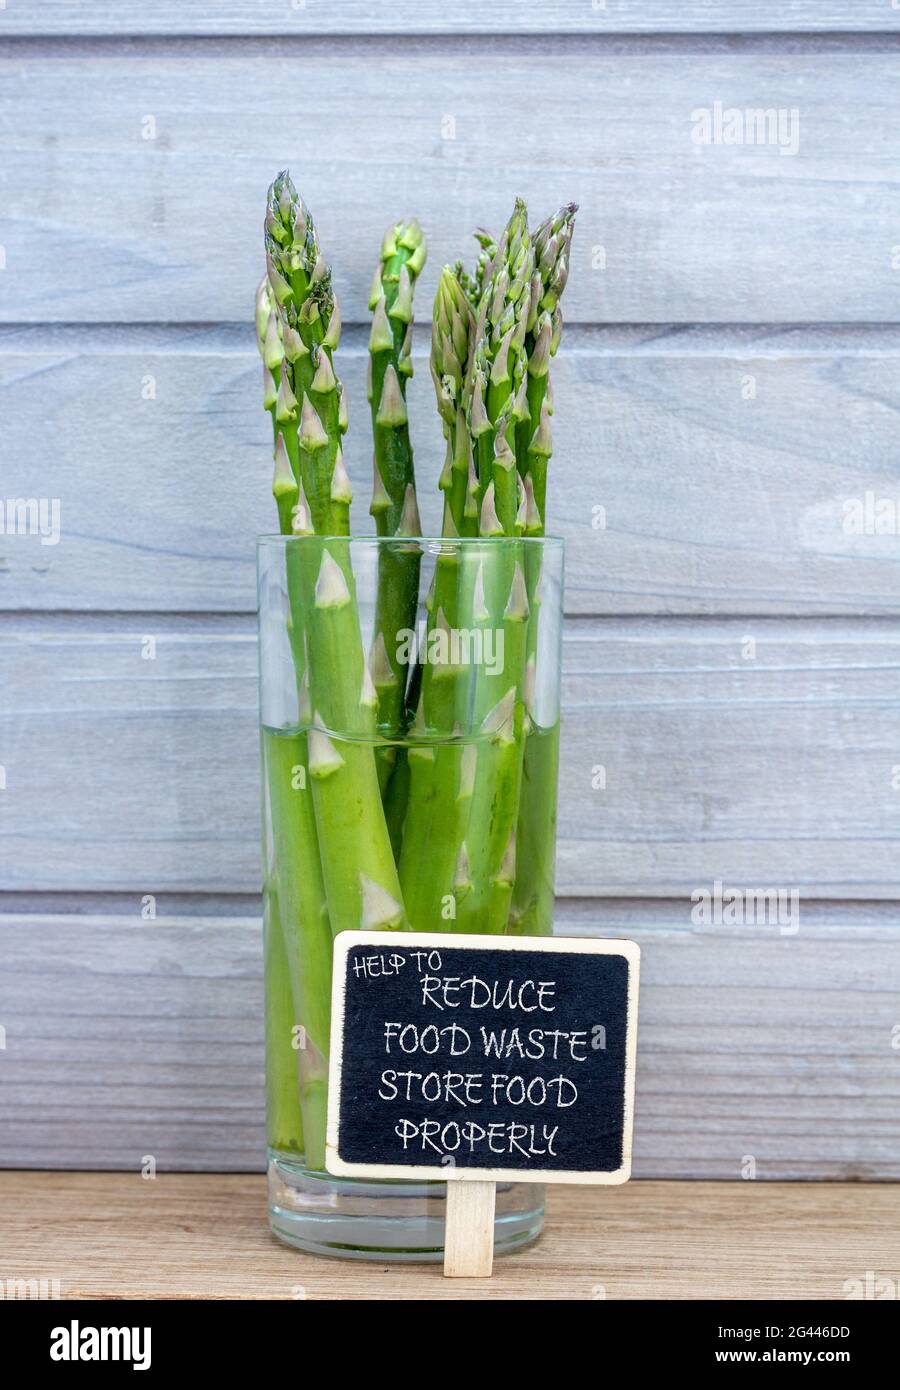 asparagus stored in water in glass to preserve it longer, help to reduce food waste, store food properly text. Good food storage to reduce home waste. Stock Photo